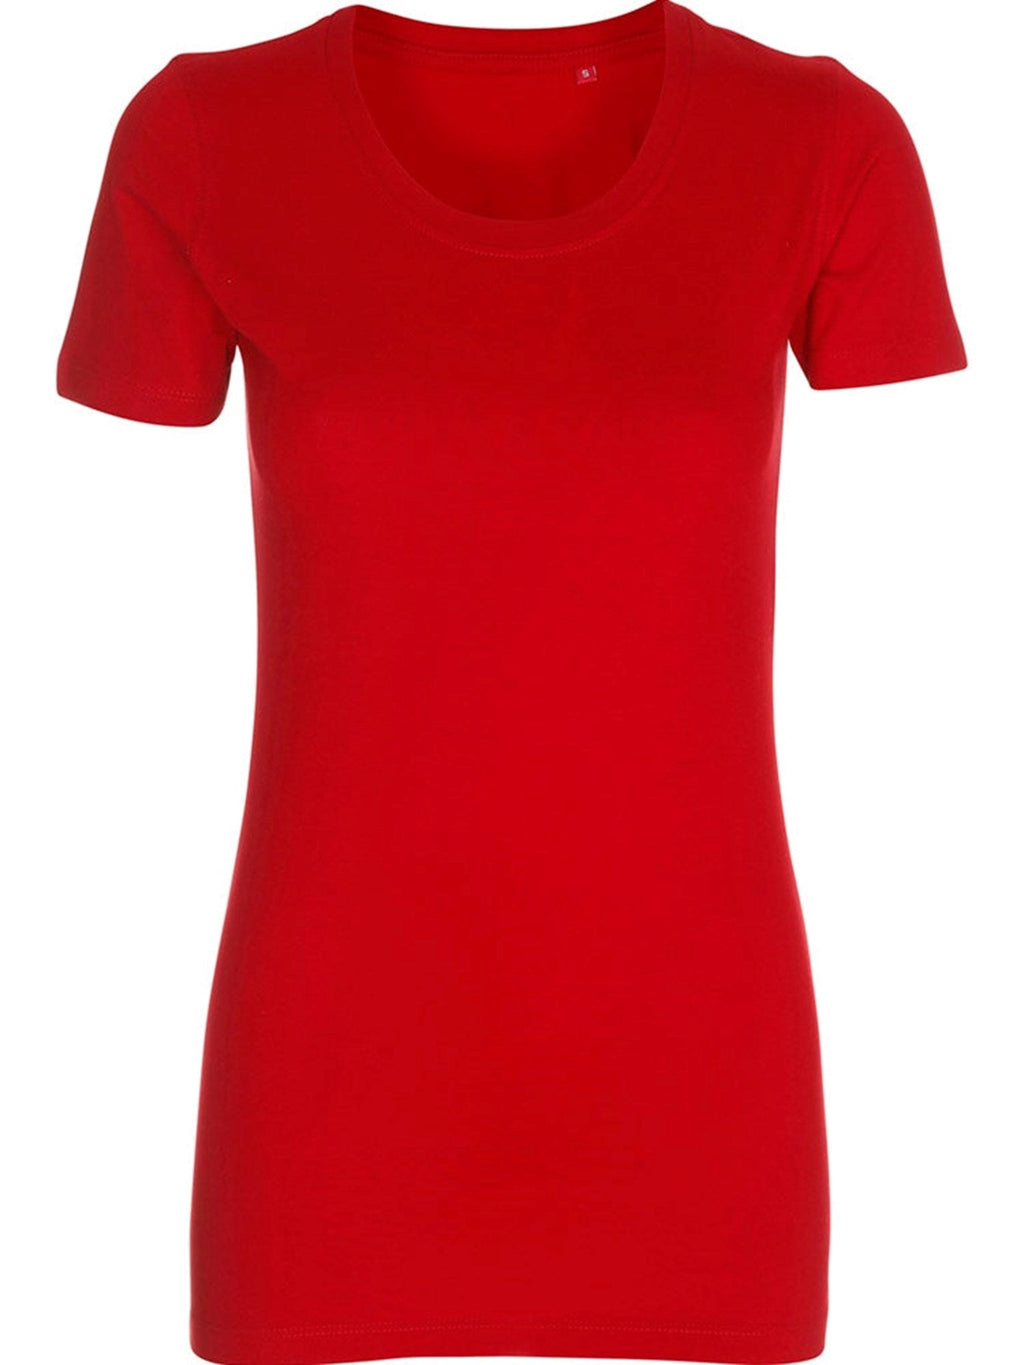 Fitted t-shirt - Red